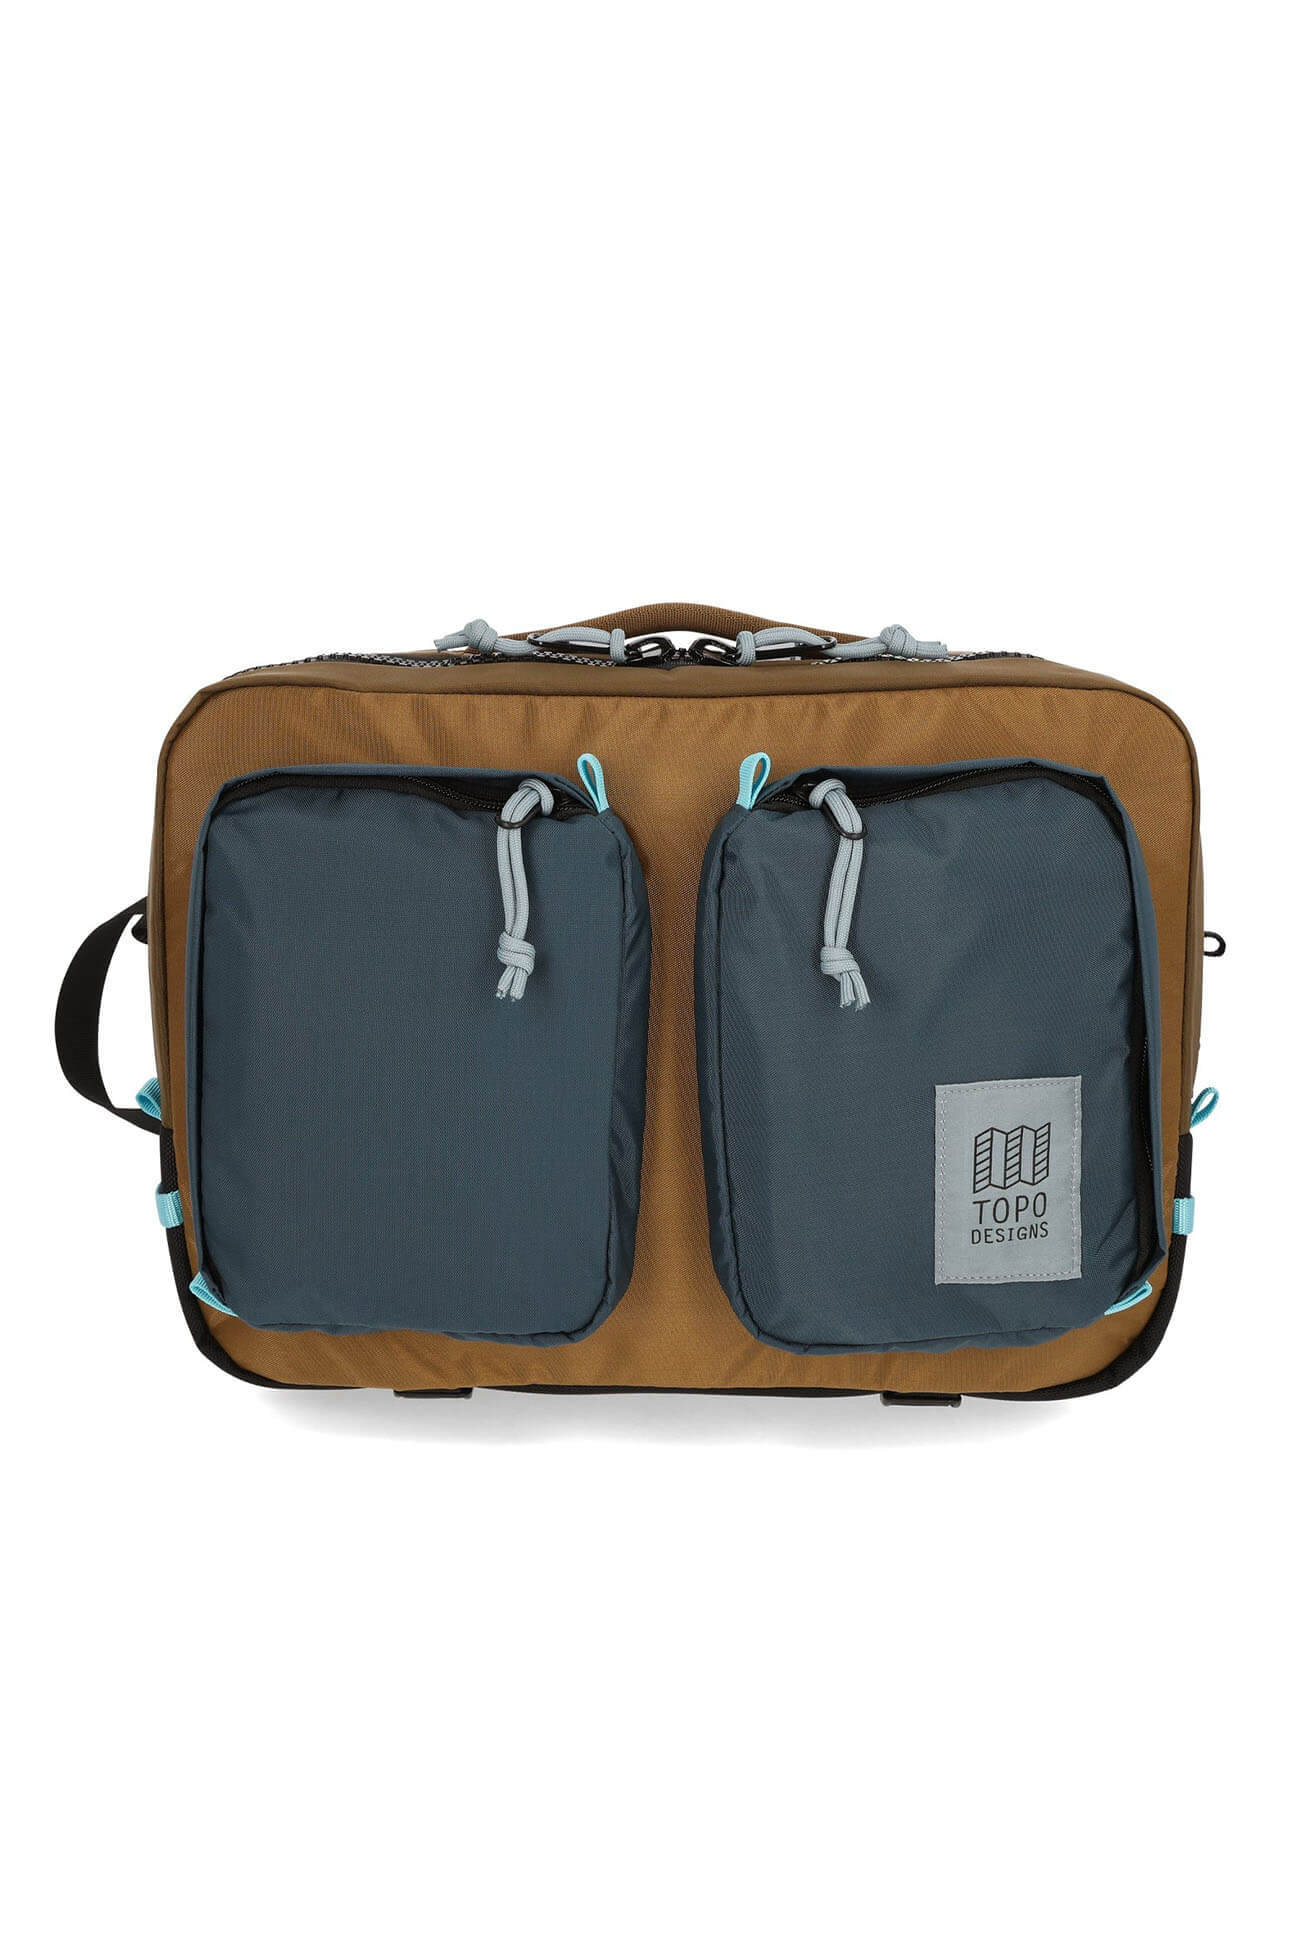 Topo Designs global briefcase in desert palm and palm blue